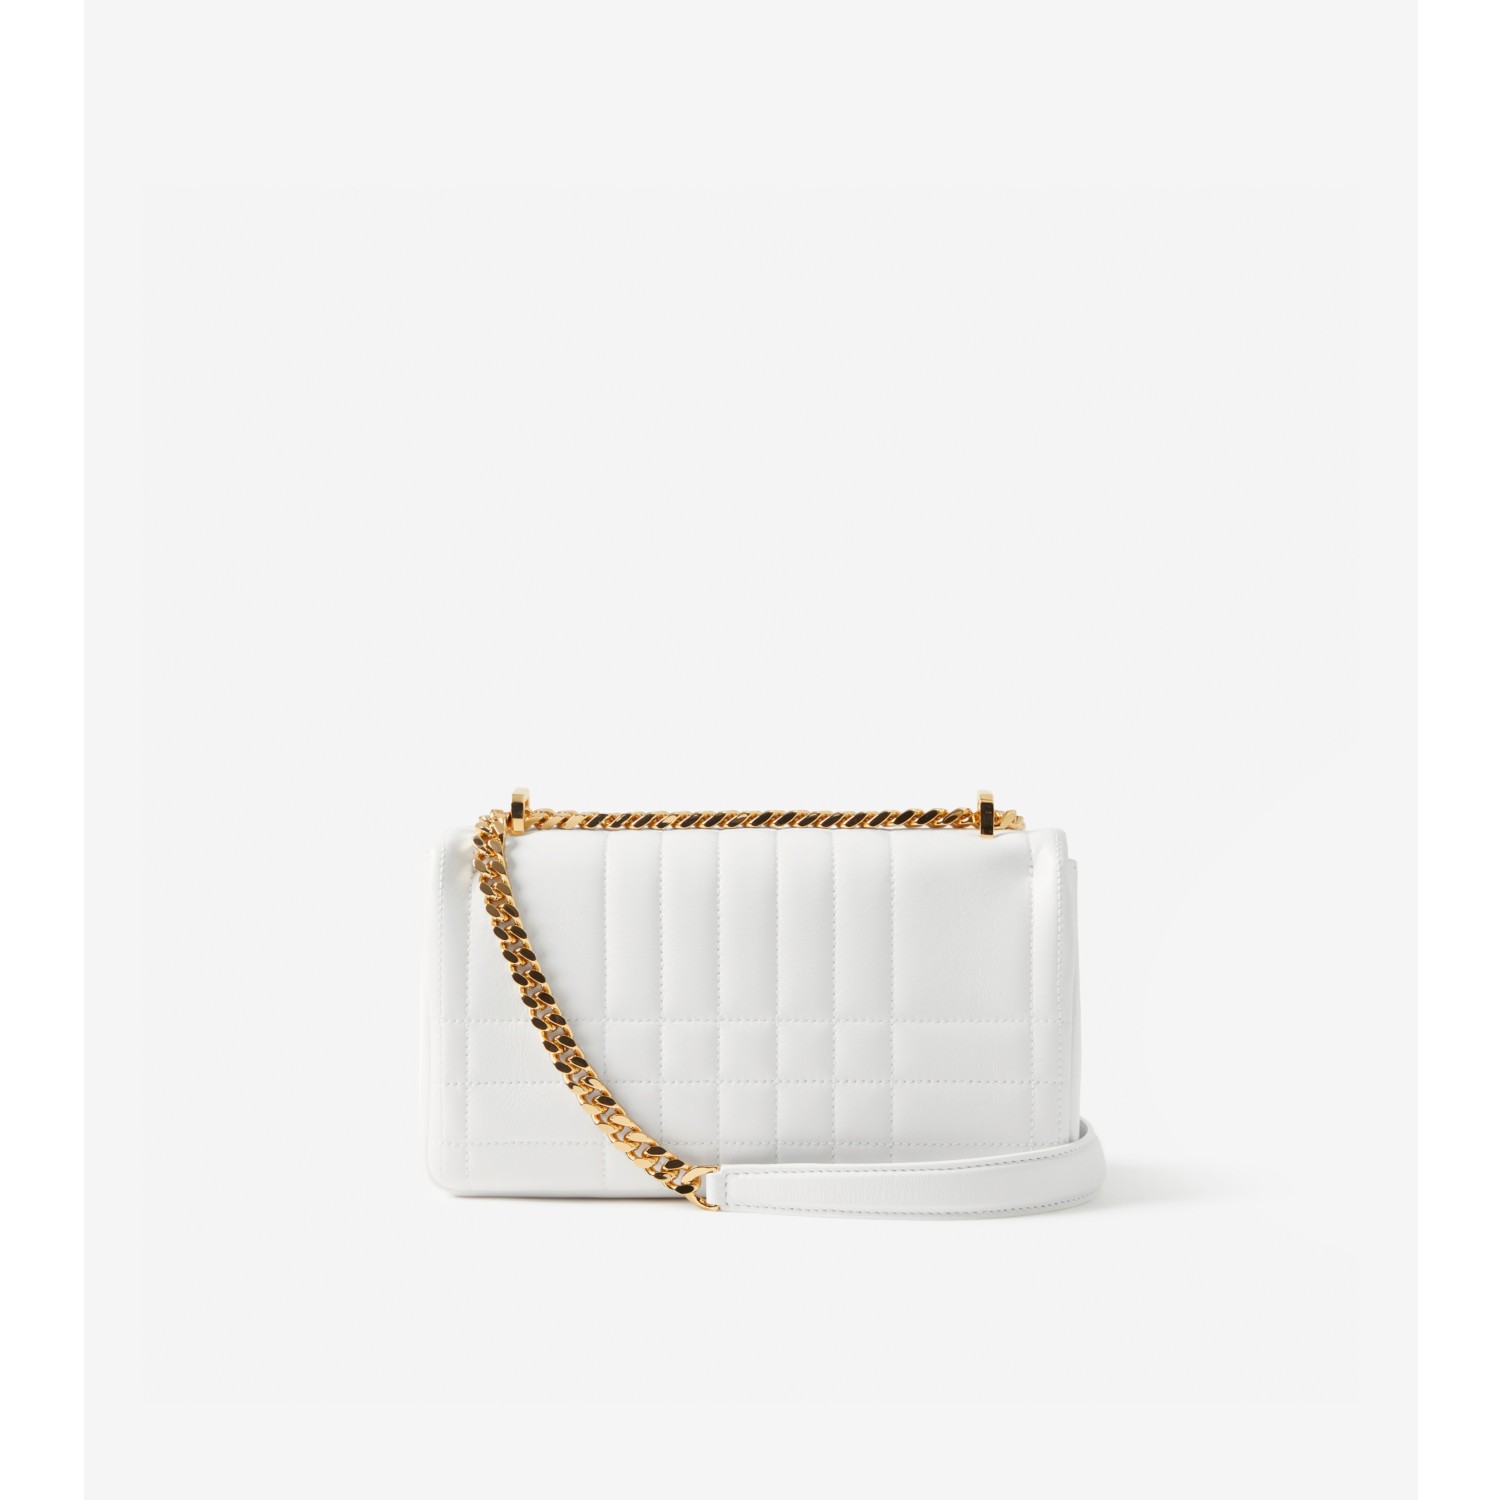 Burberry Small Lola Bag Optic White in Lambskin Leather with Gold